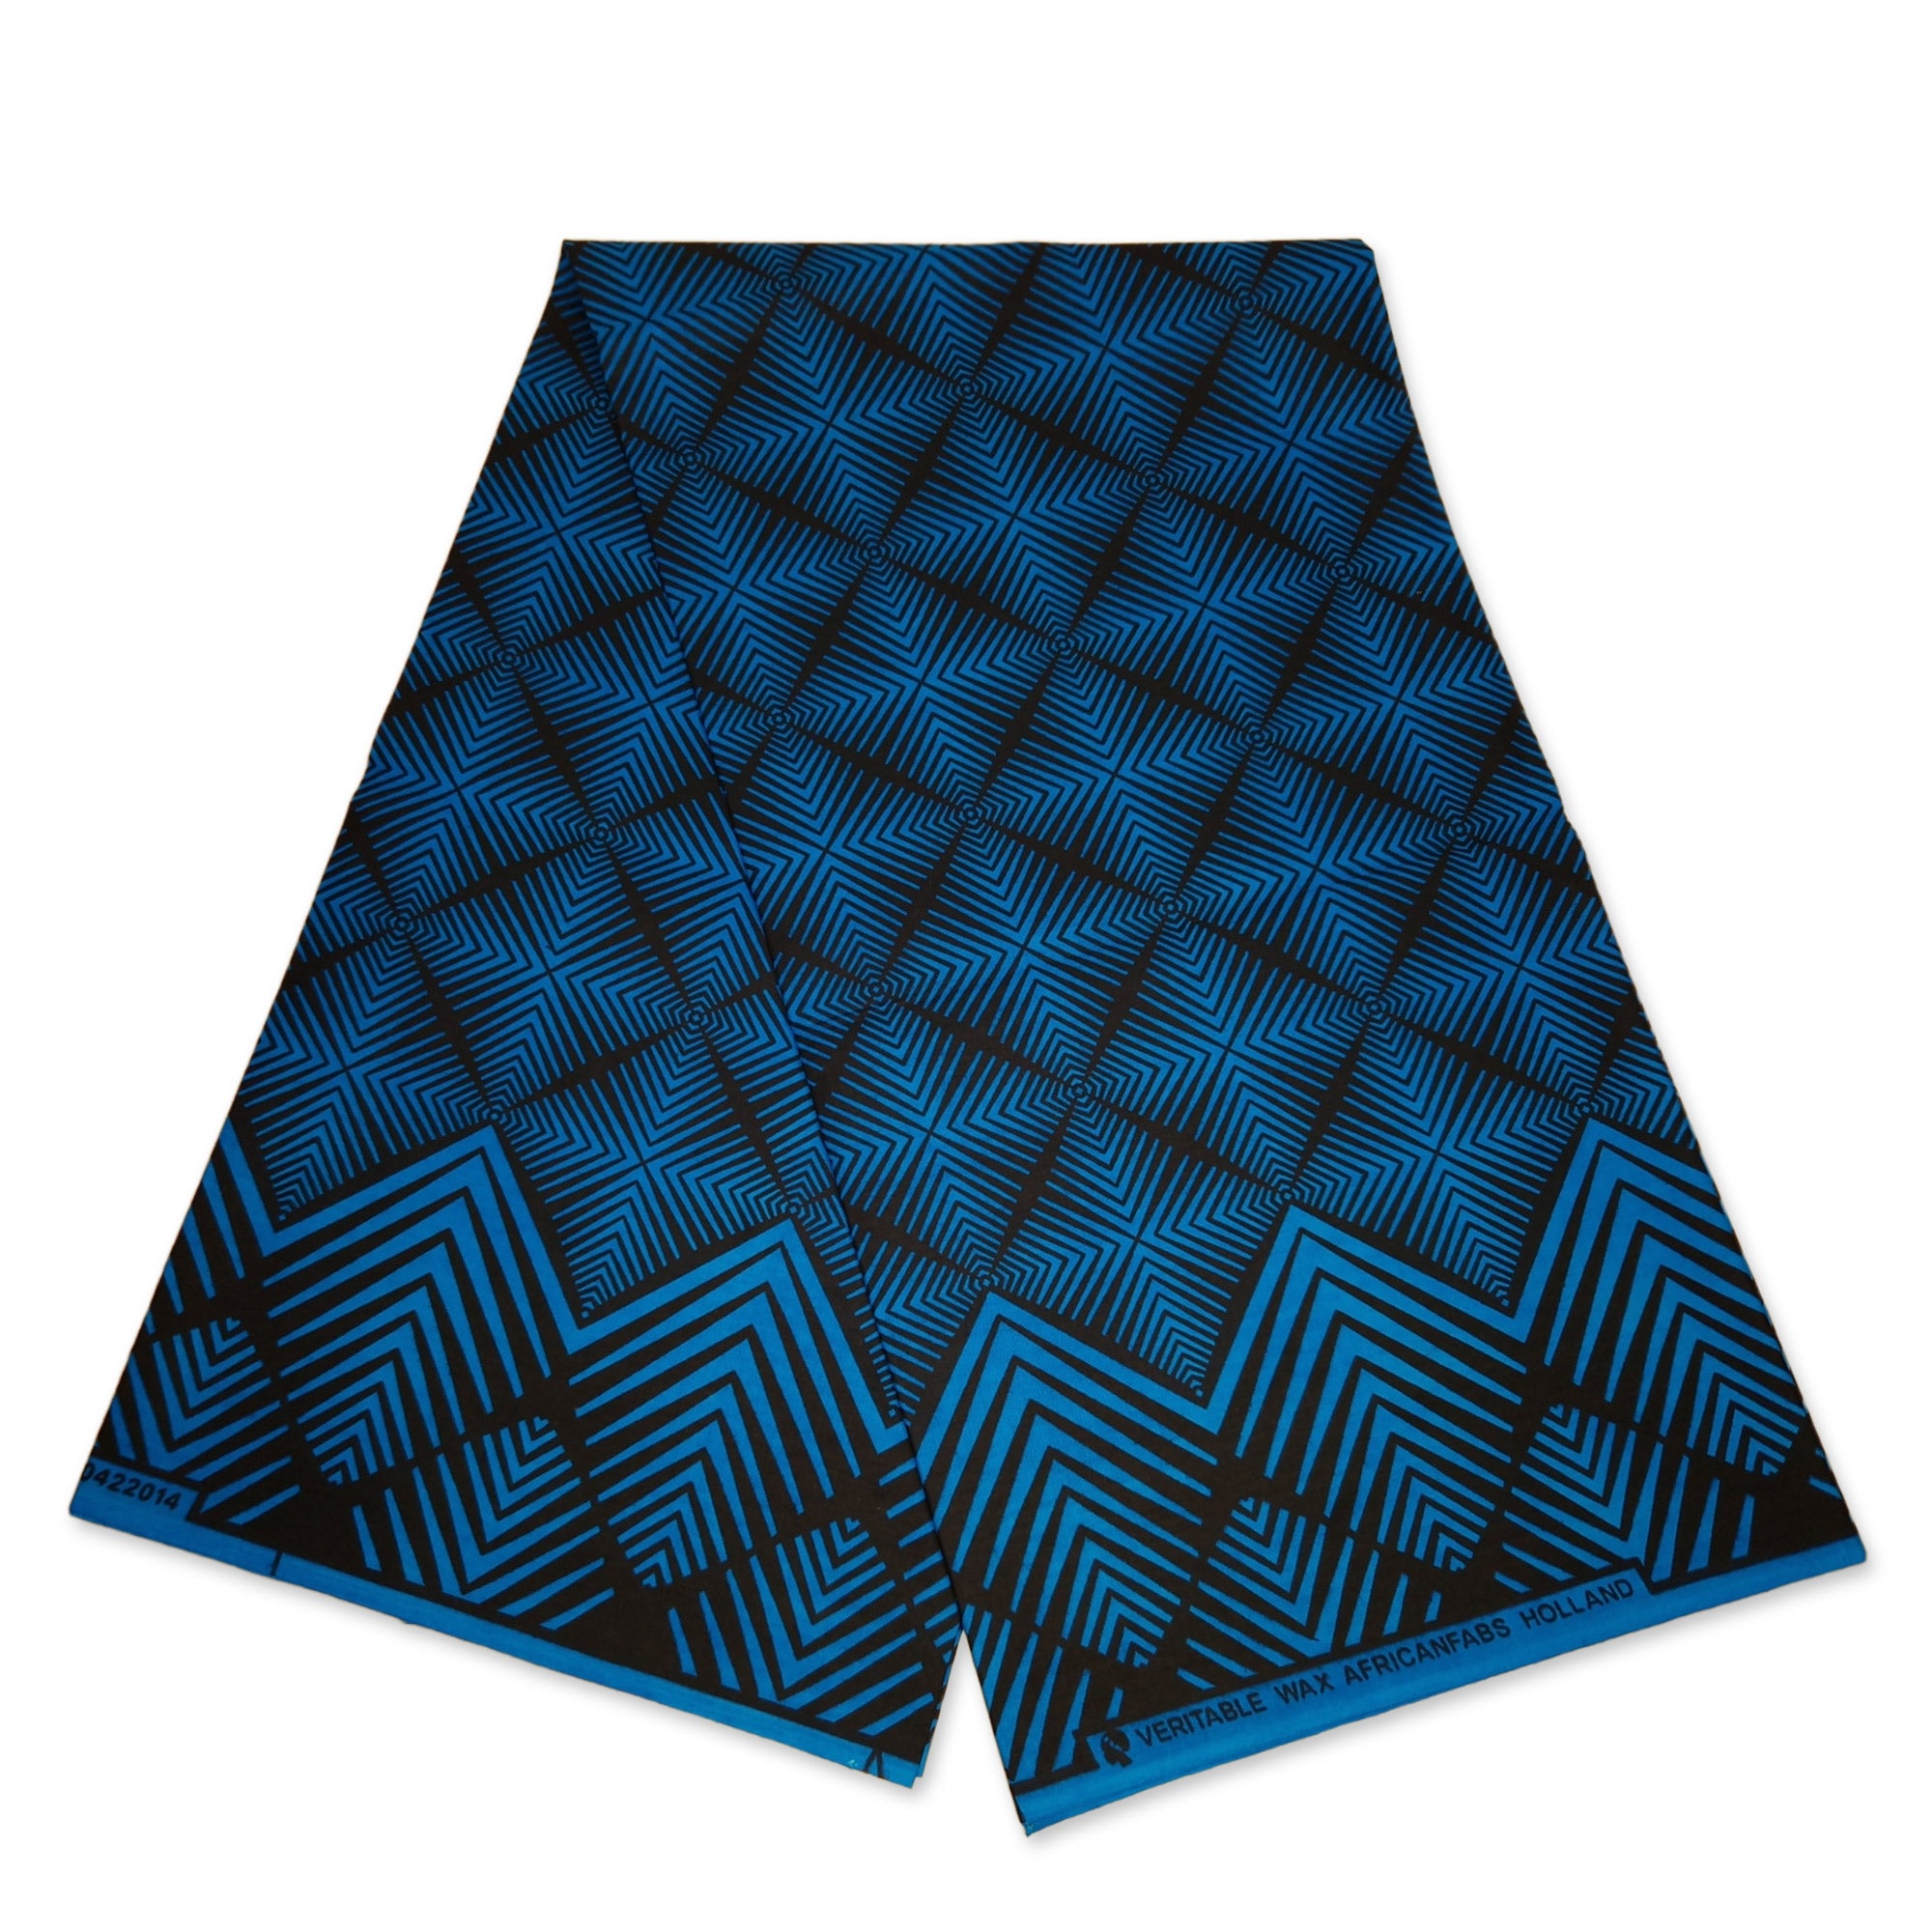 African print fabric - Blue Fade Effect - 100% cotton